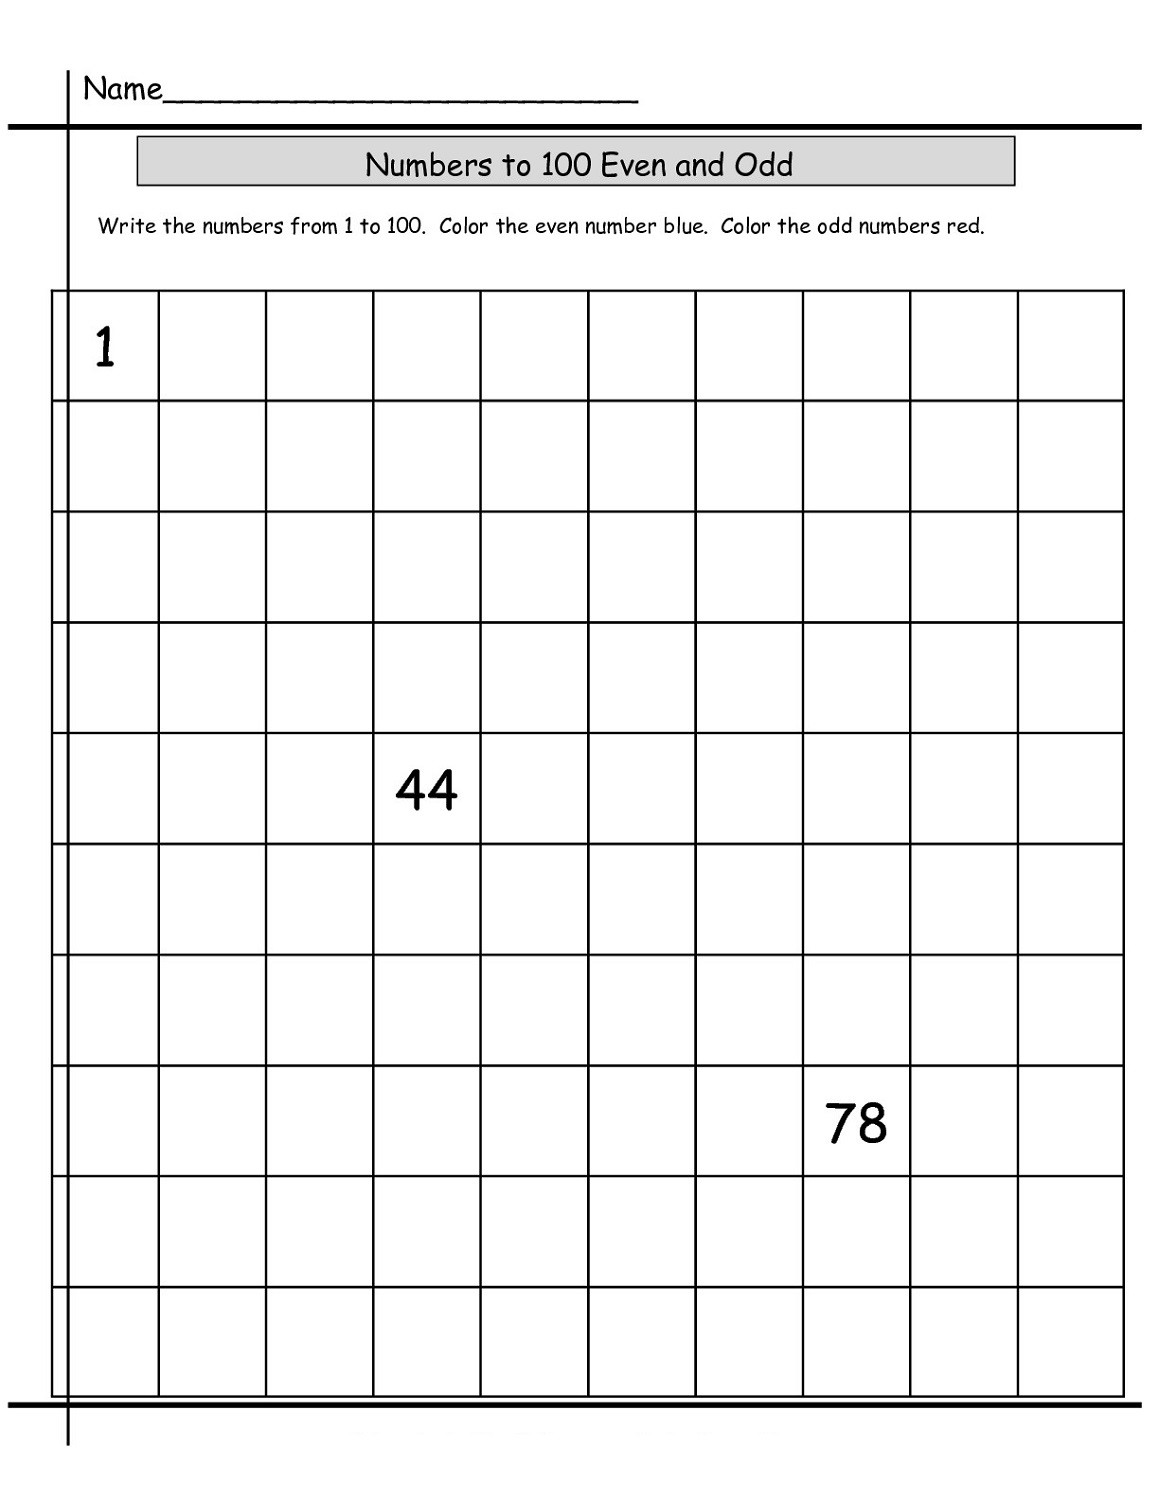 Classifying Real Numbers Worksheet 28 [ Classifying Real Numbers Worksheet ]